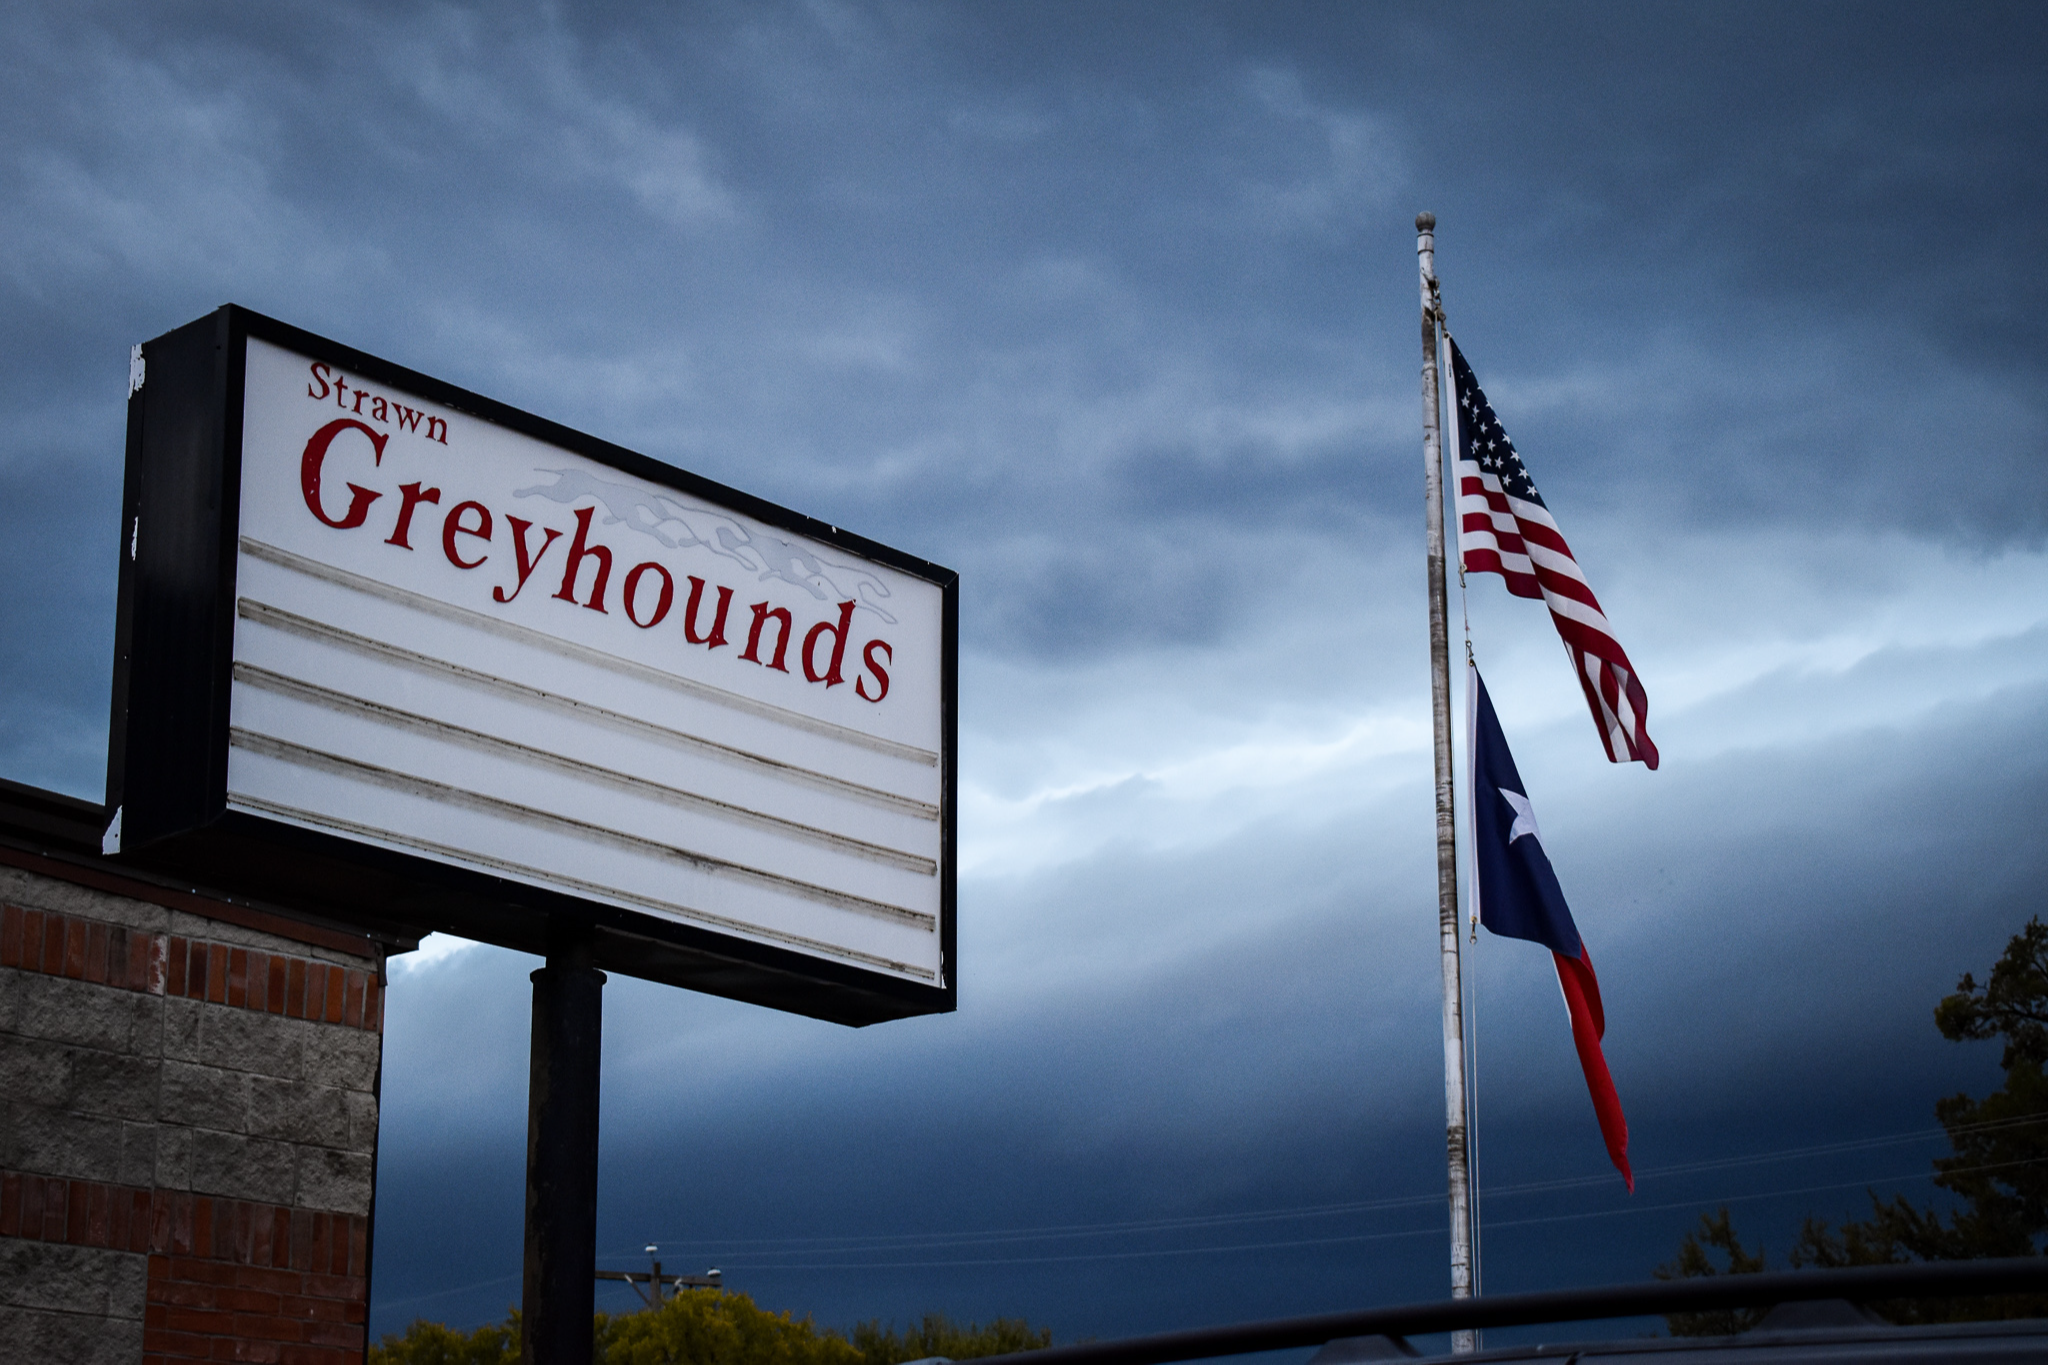 Strawn Greyhounds sign with US & Texas flags, storm in background